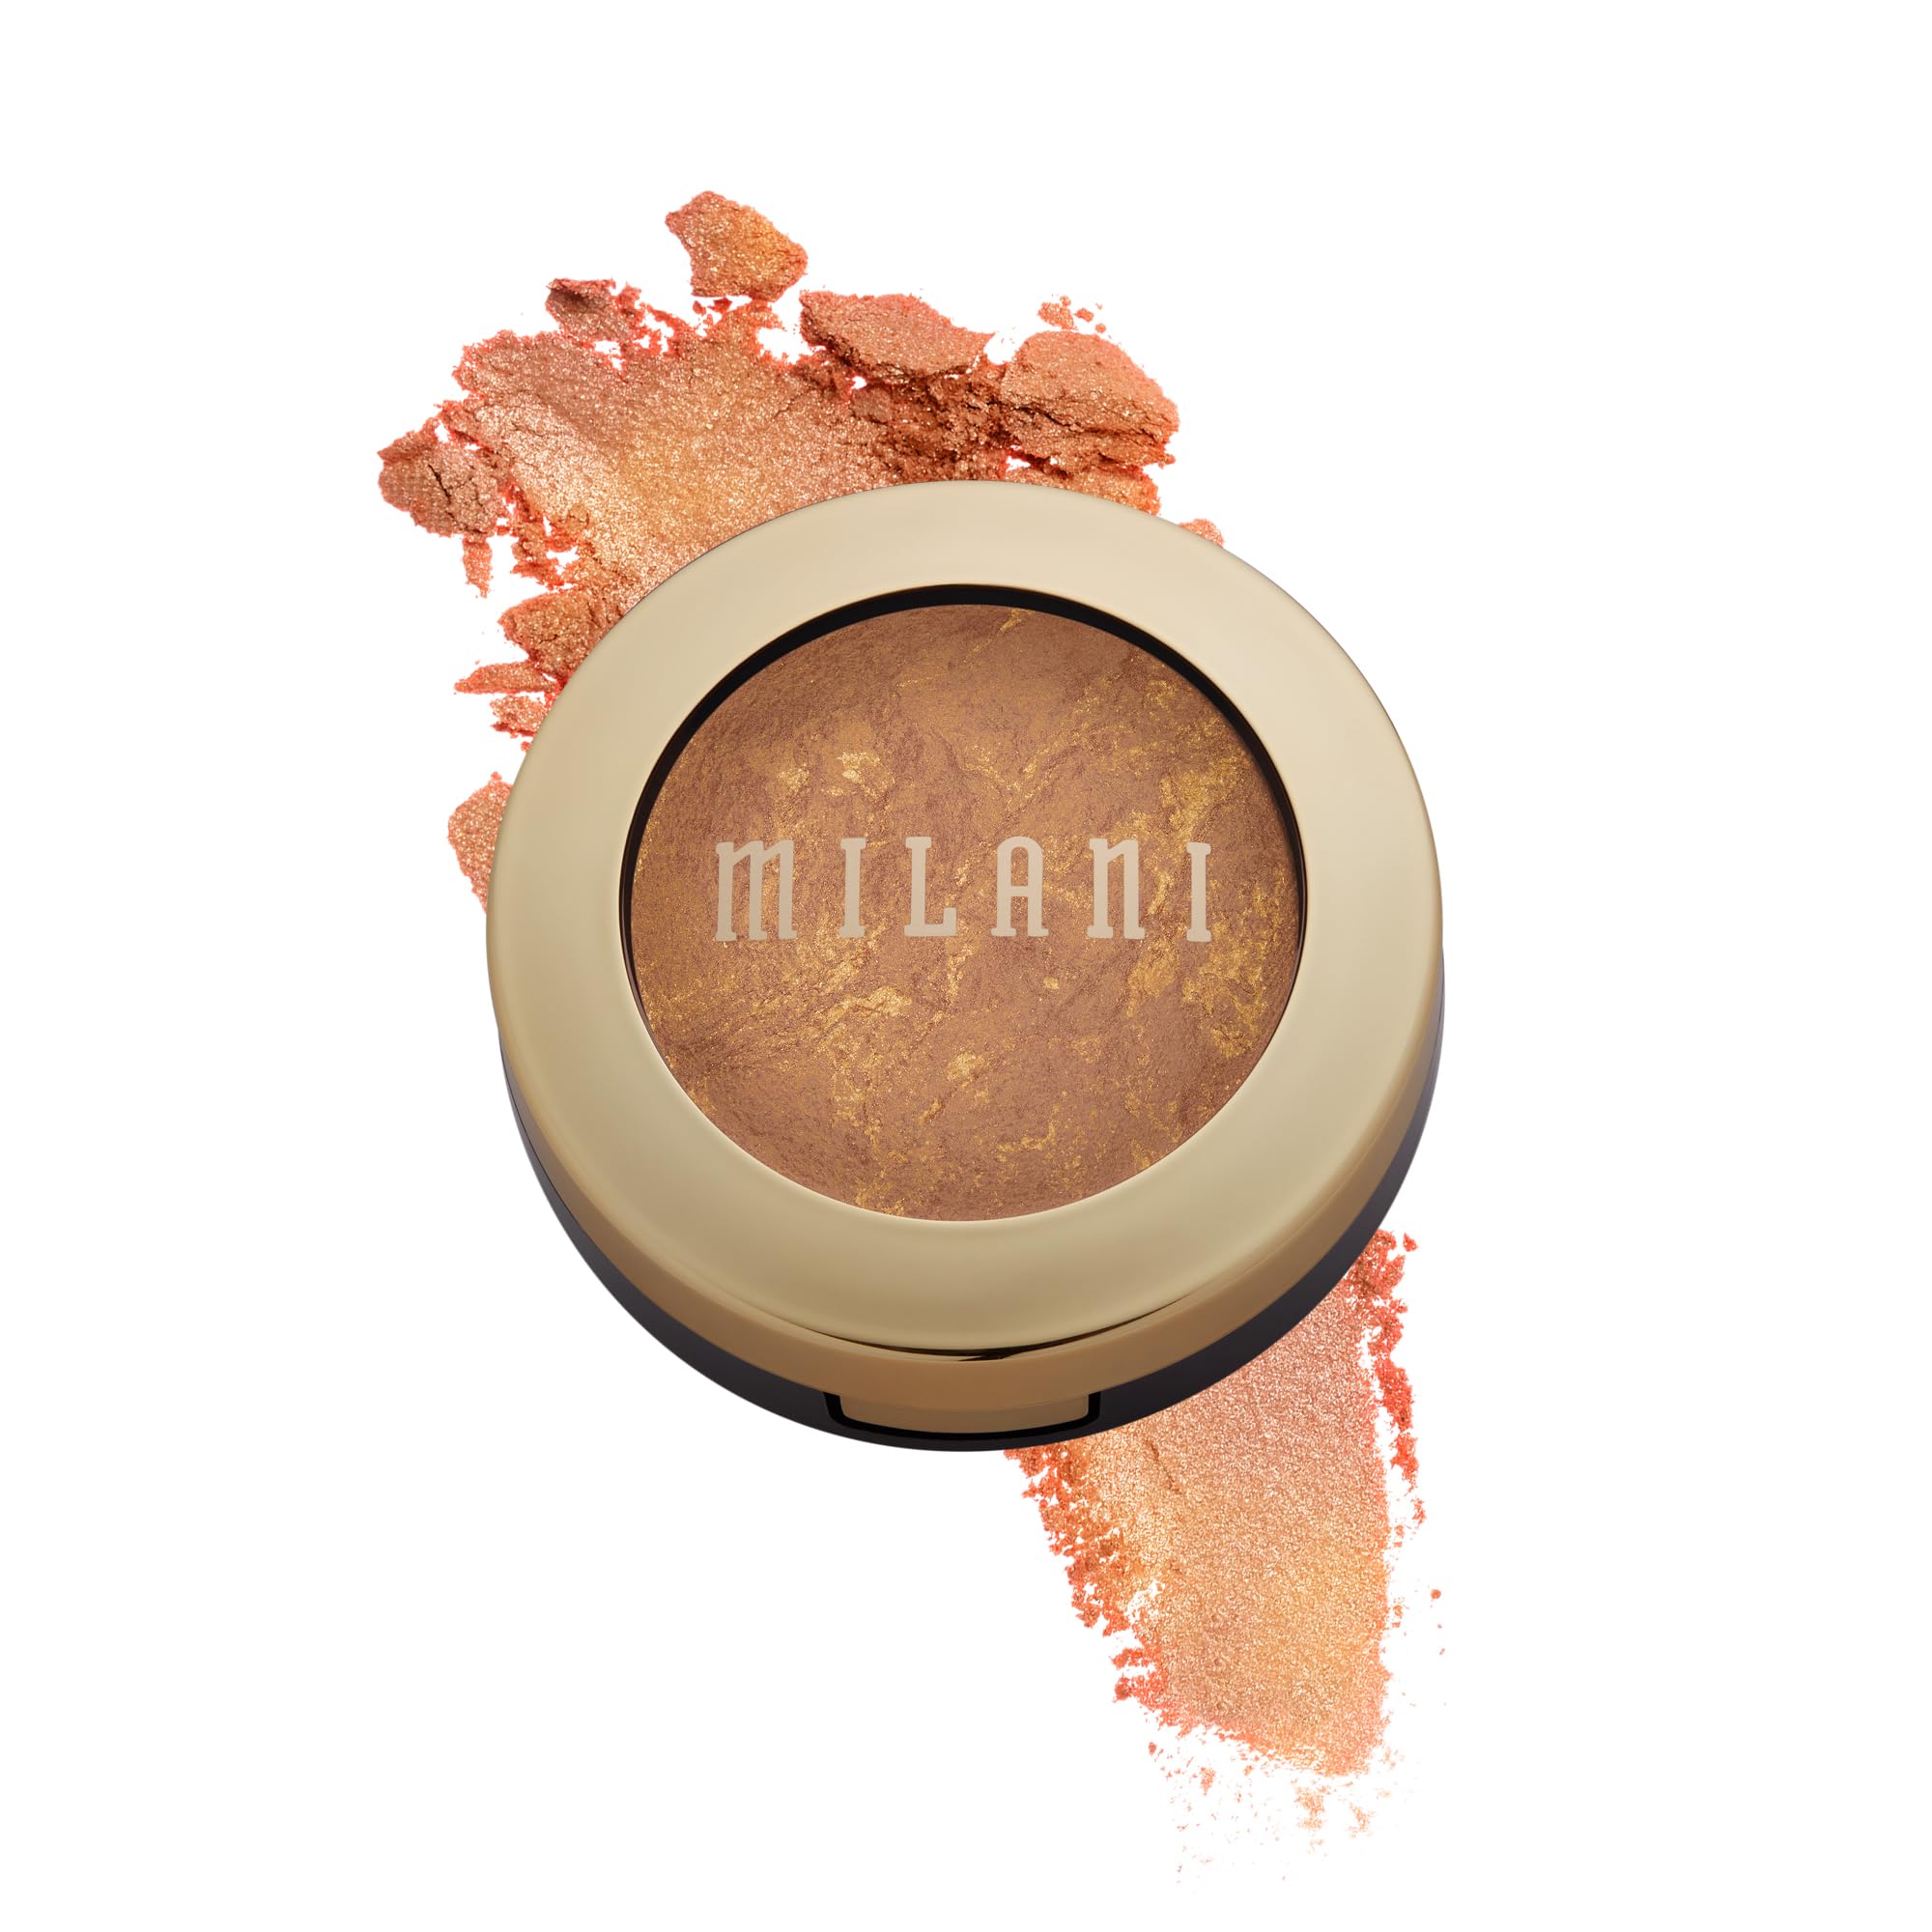 Book Cover Milani Baked Bronzer - Glow, Cruelty-Free Shimmer Bronzing Powder to Use For Contour Makeup, Highlighters Makeup, Bronzer Makeup, 0.25 Ounce